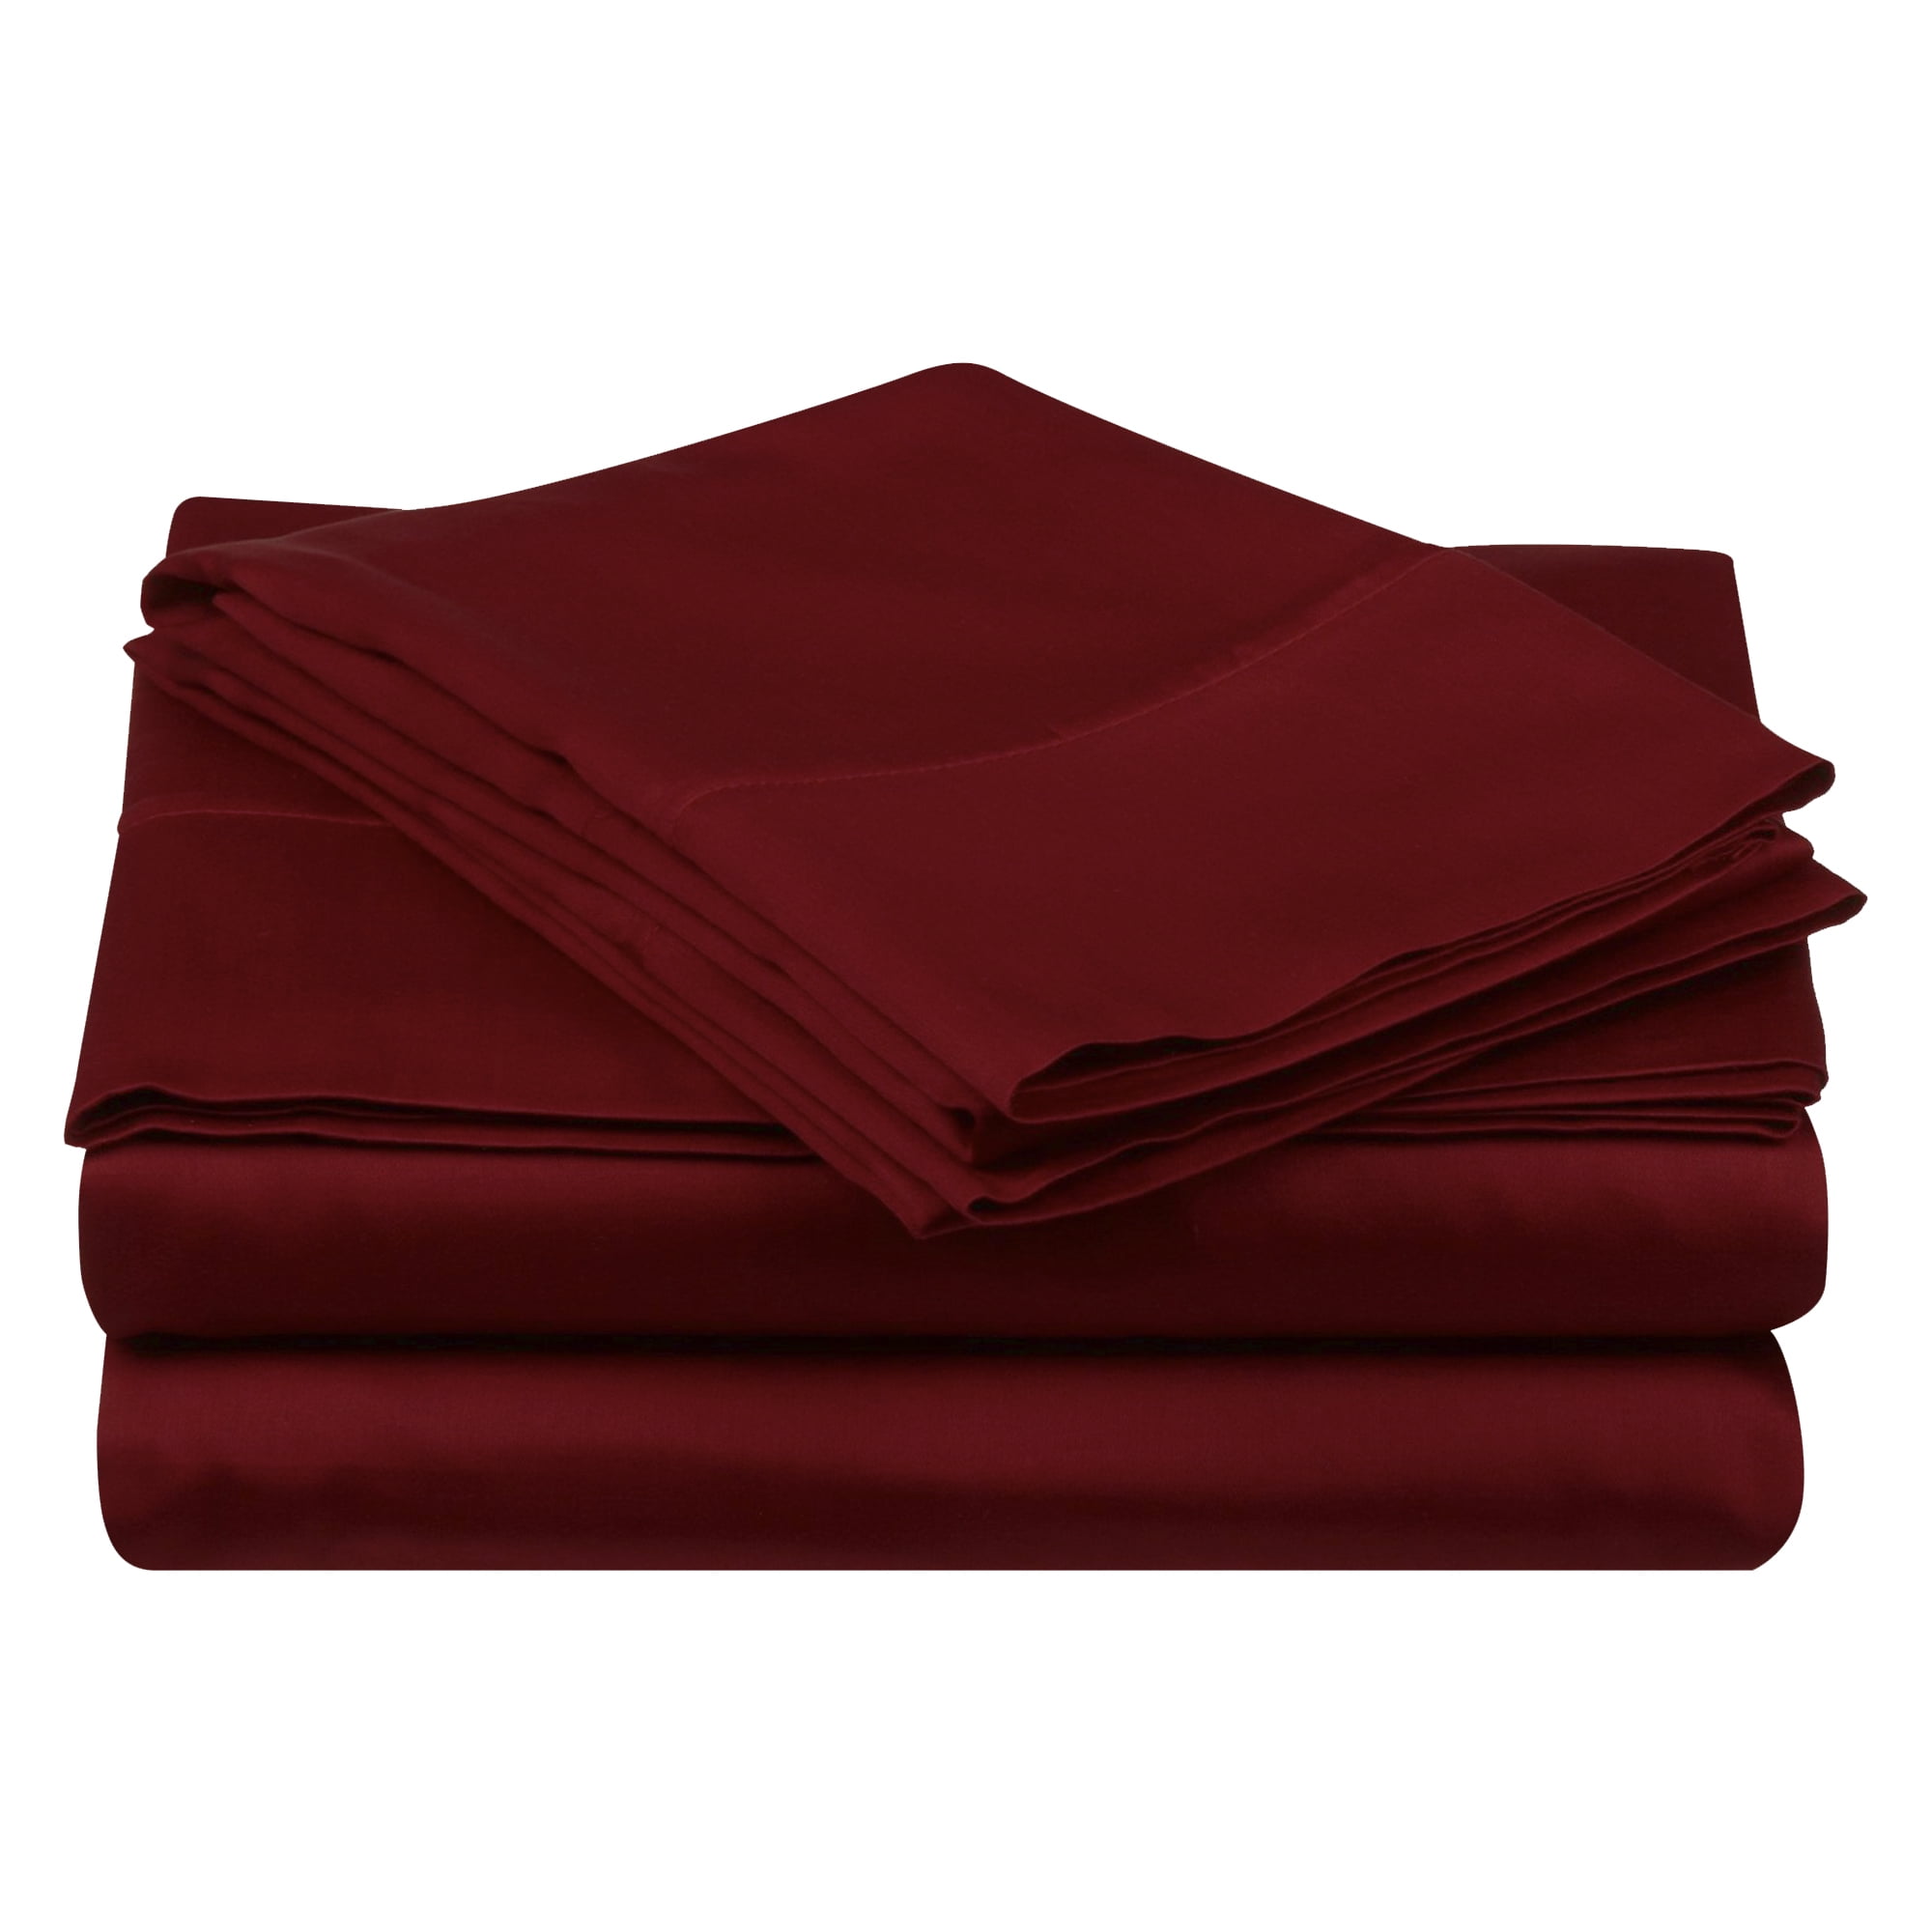 Fitted Sheet 100% Cotton 400 TC Burgundy Solid 